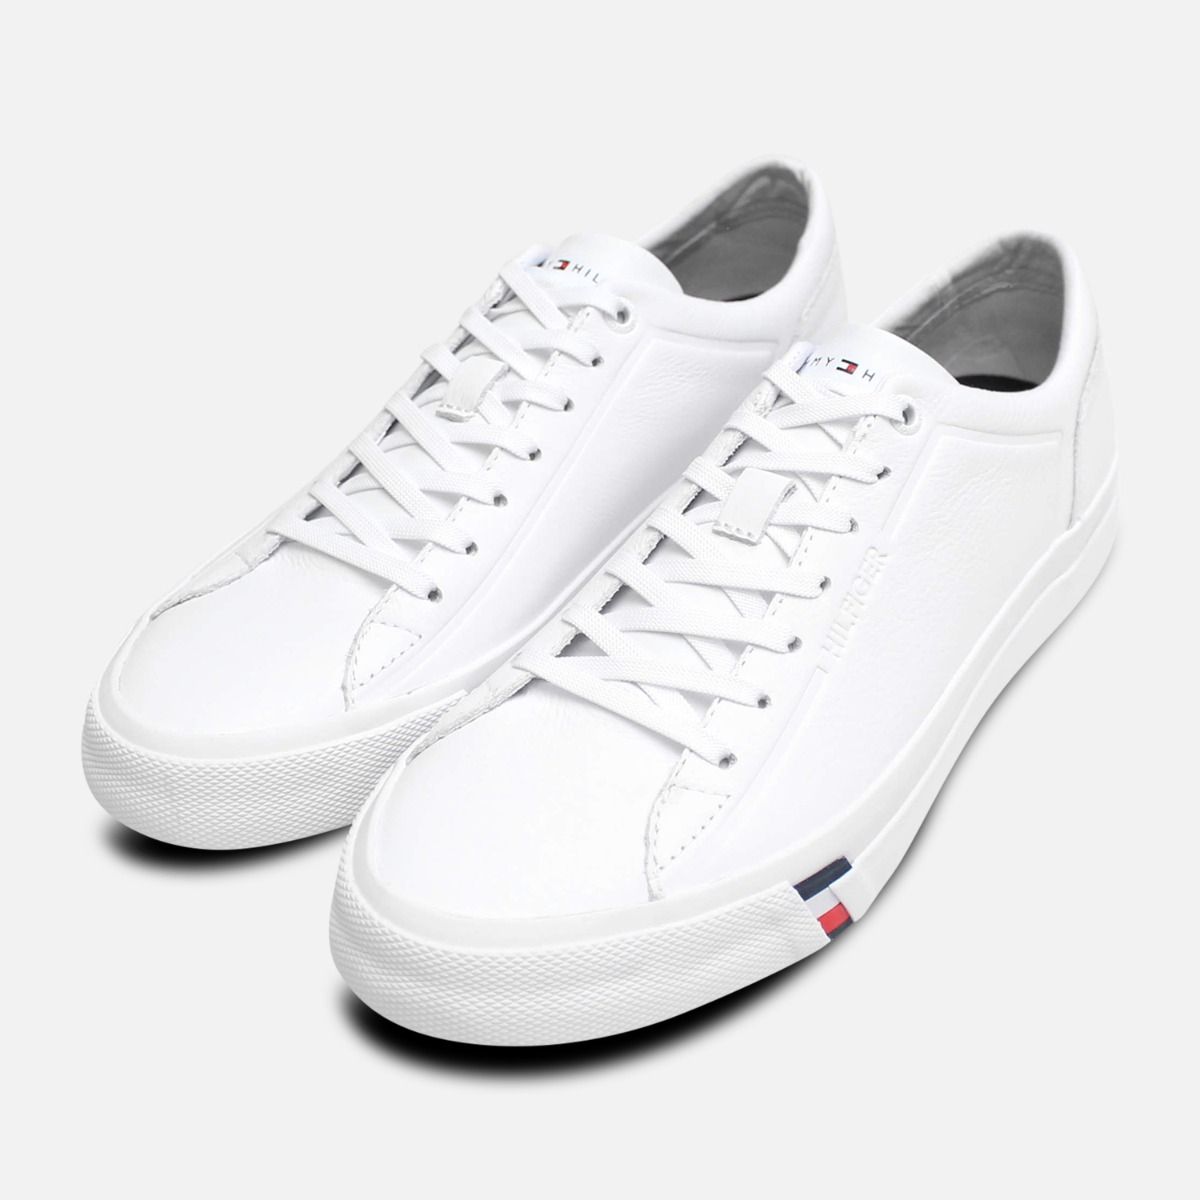 tommy hilfiger athletic shoes